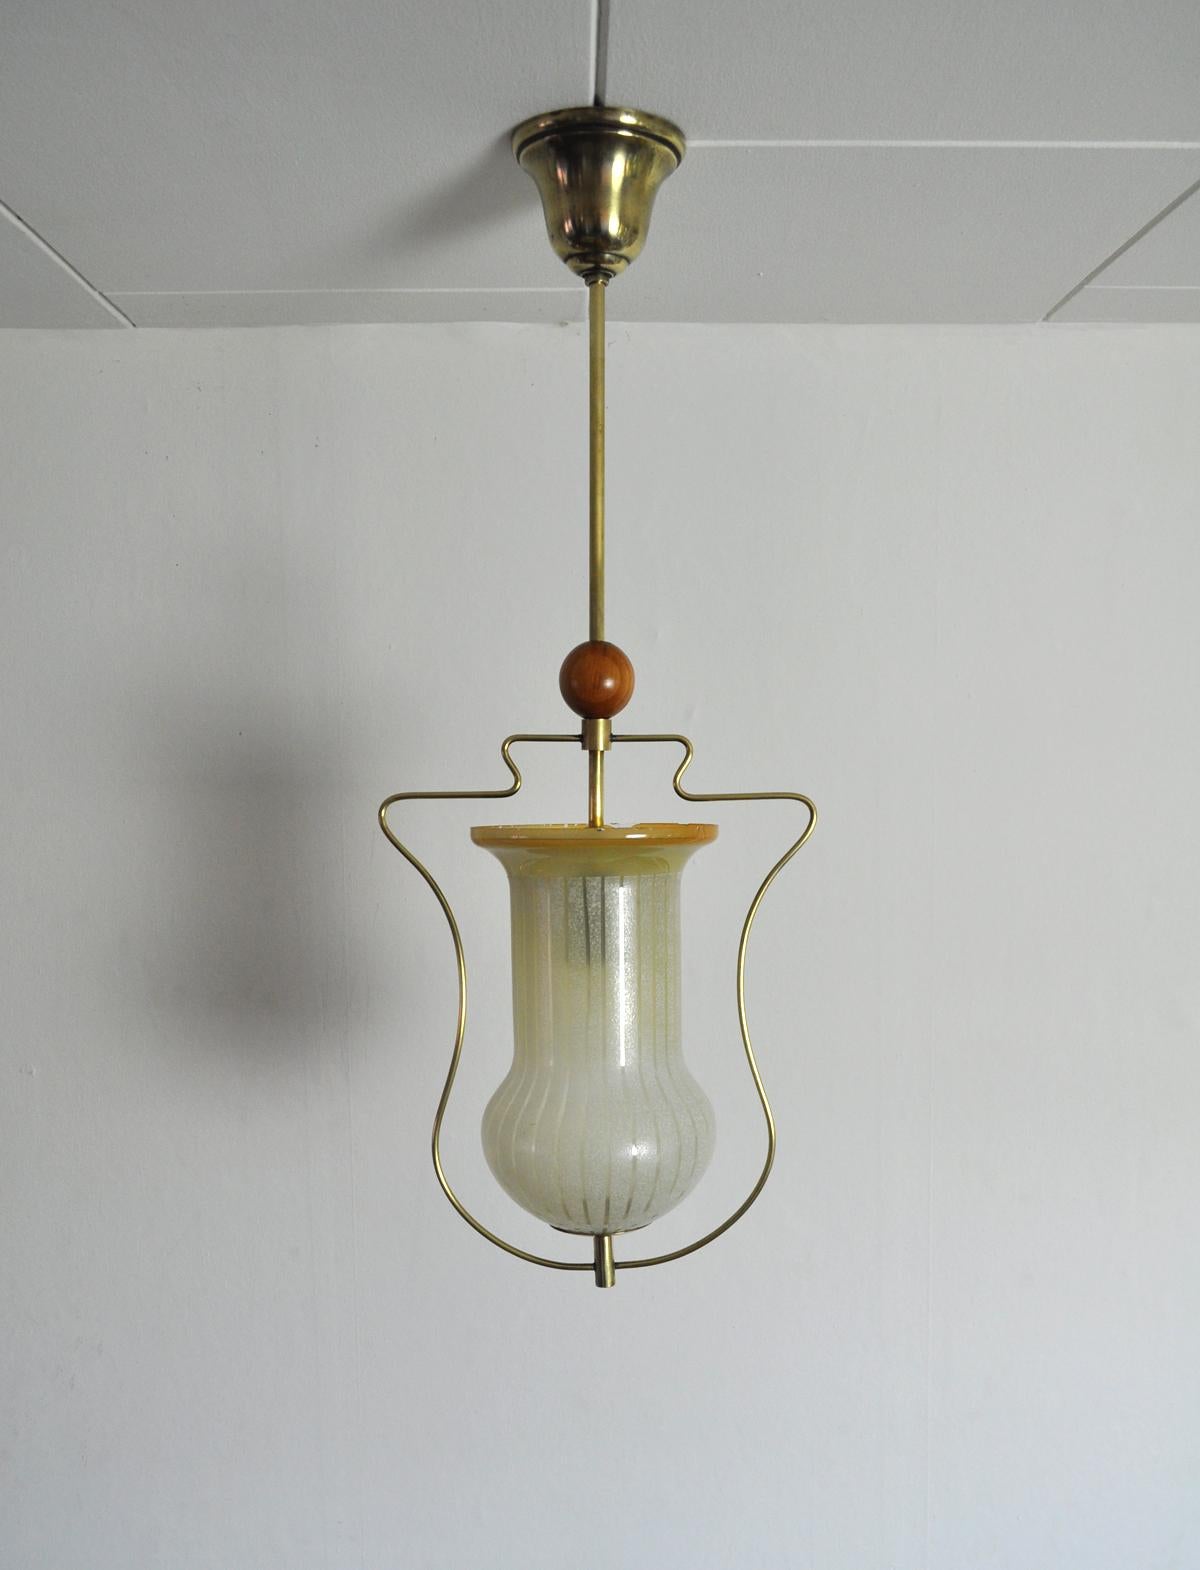 Brass and etched glass Art Deco pendant light with the original canopy.
Probably produced in Sweden in the 1930s.
Fine vintage condition, signs of wear consistent with age and use. Small chips on the top of the glass shade.
Light source: E27